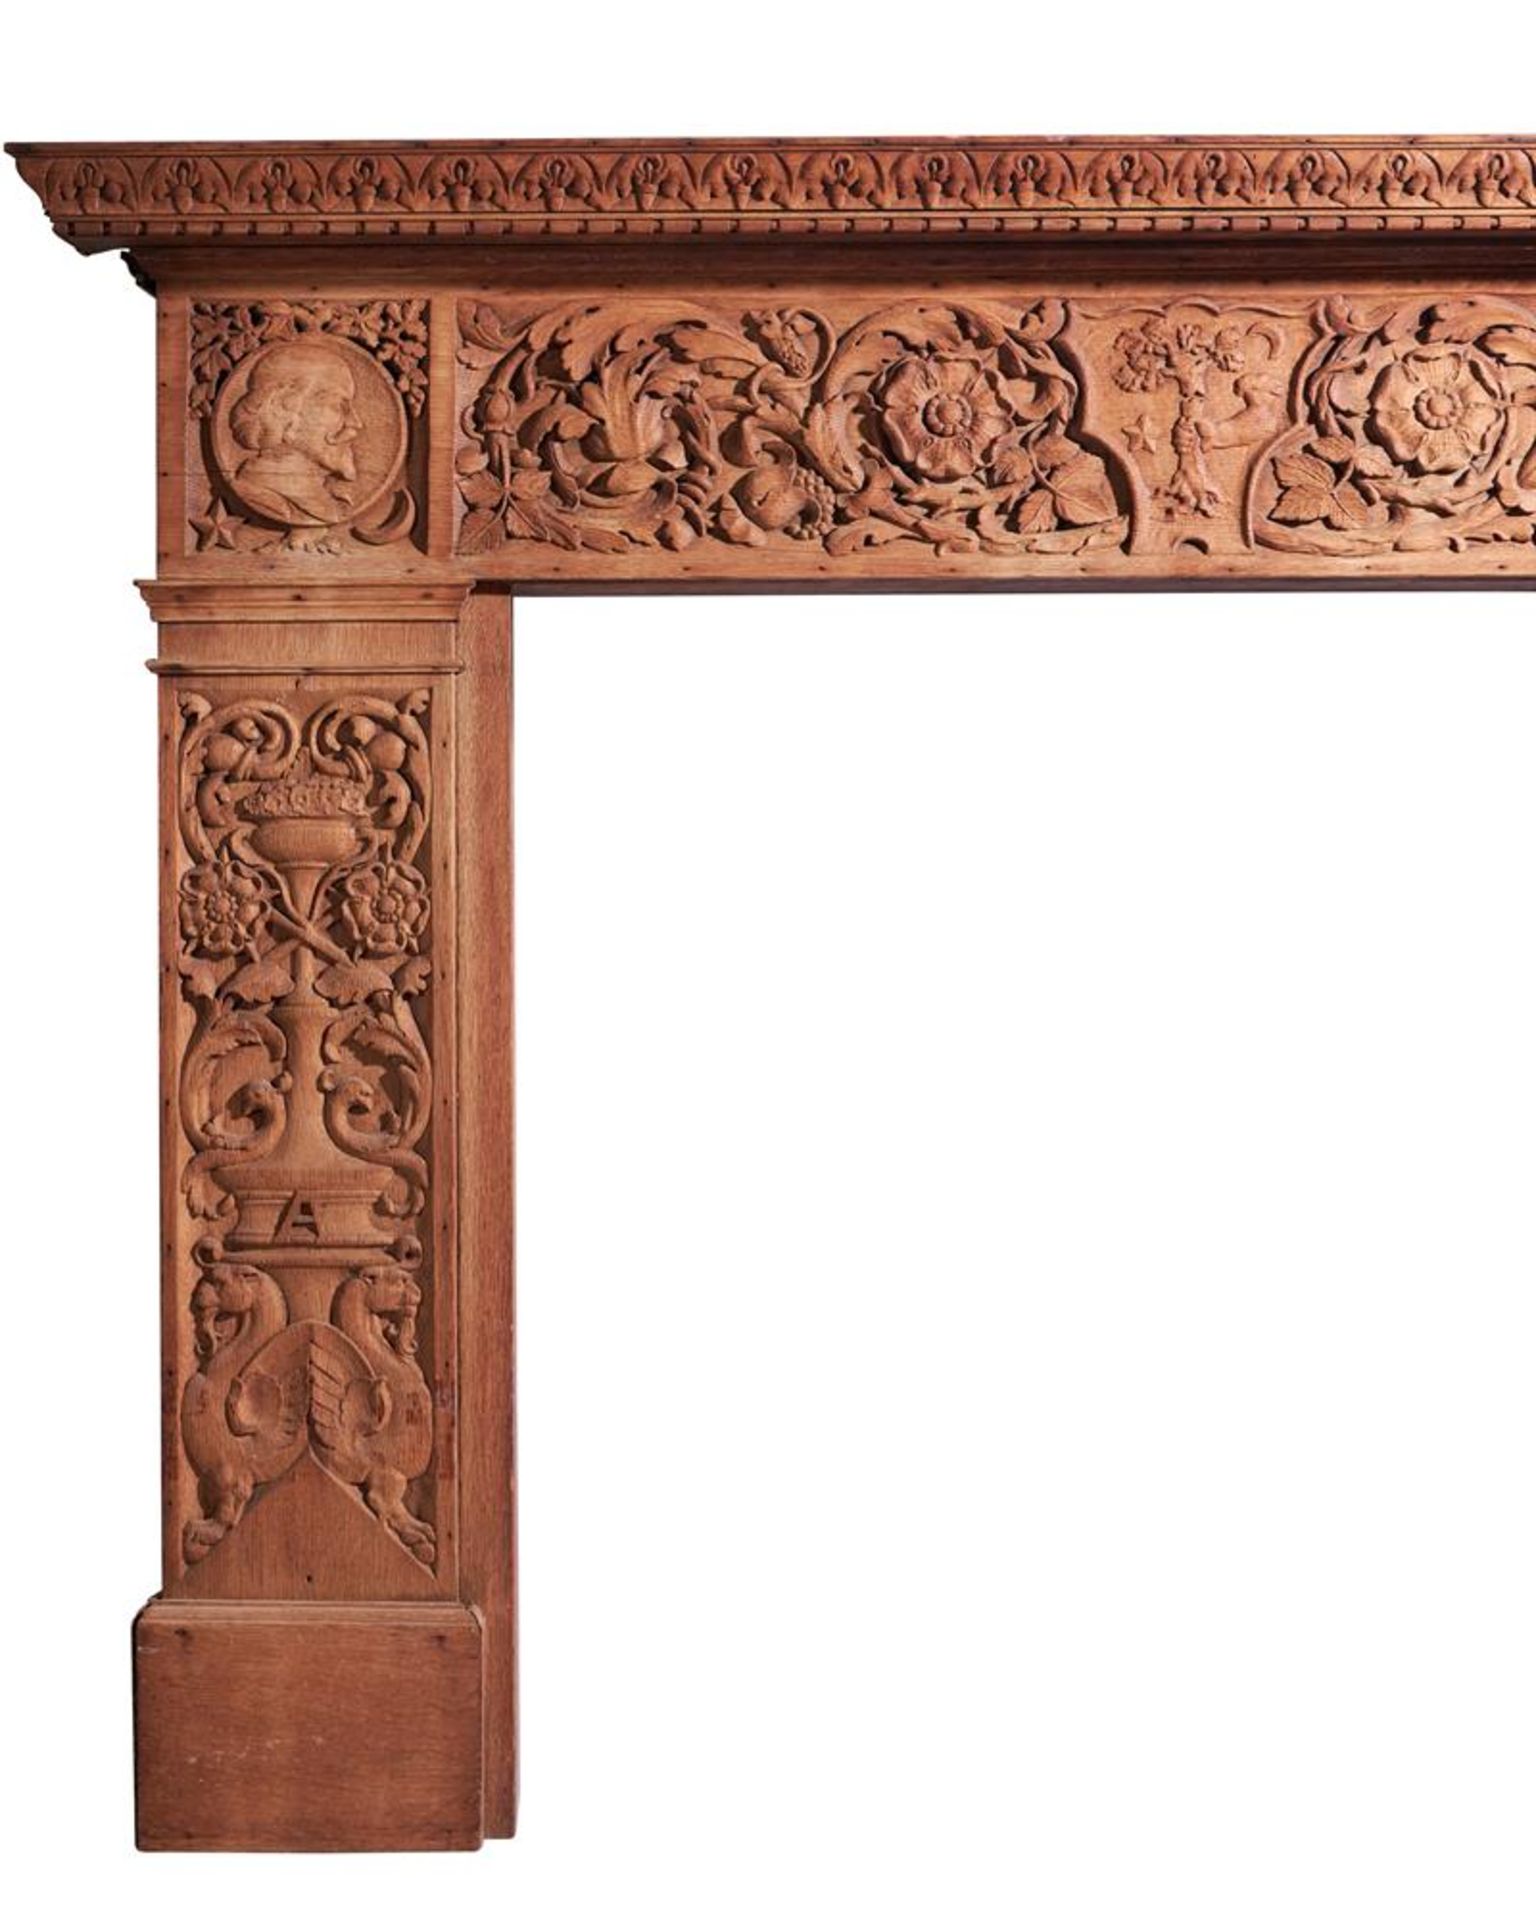 A VICTORIAN RENAISSANCE REVIVAL CARVED OAK CHIMNEYPIECE, LATE 19TH CENTURY - Image 2 of 6